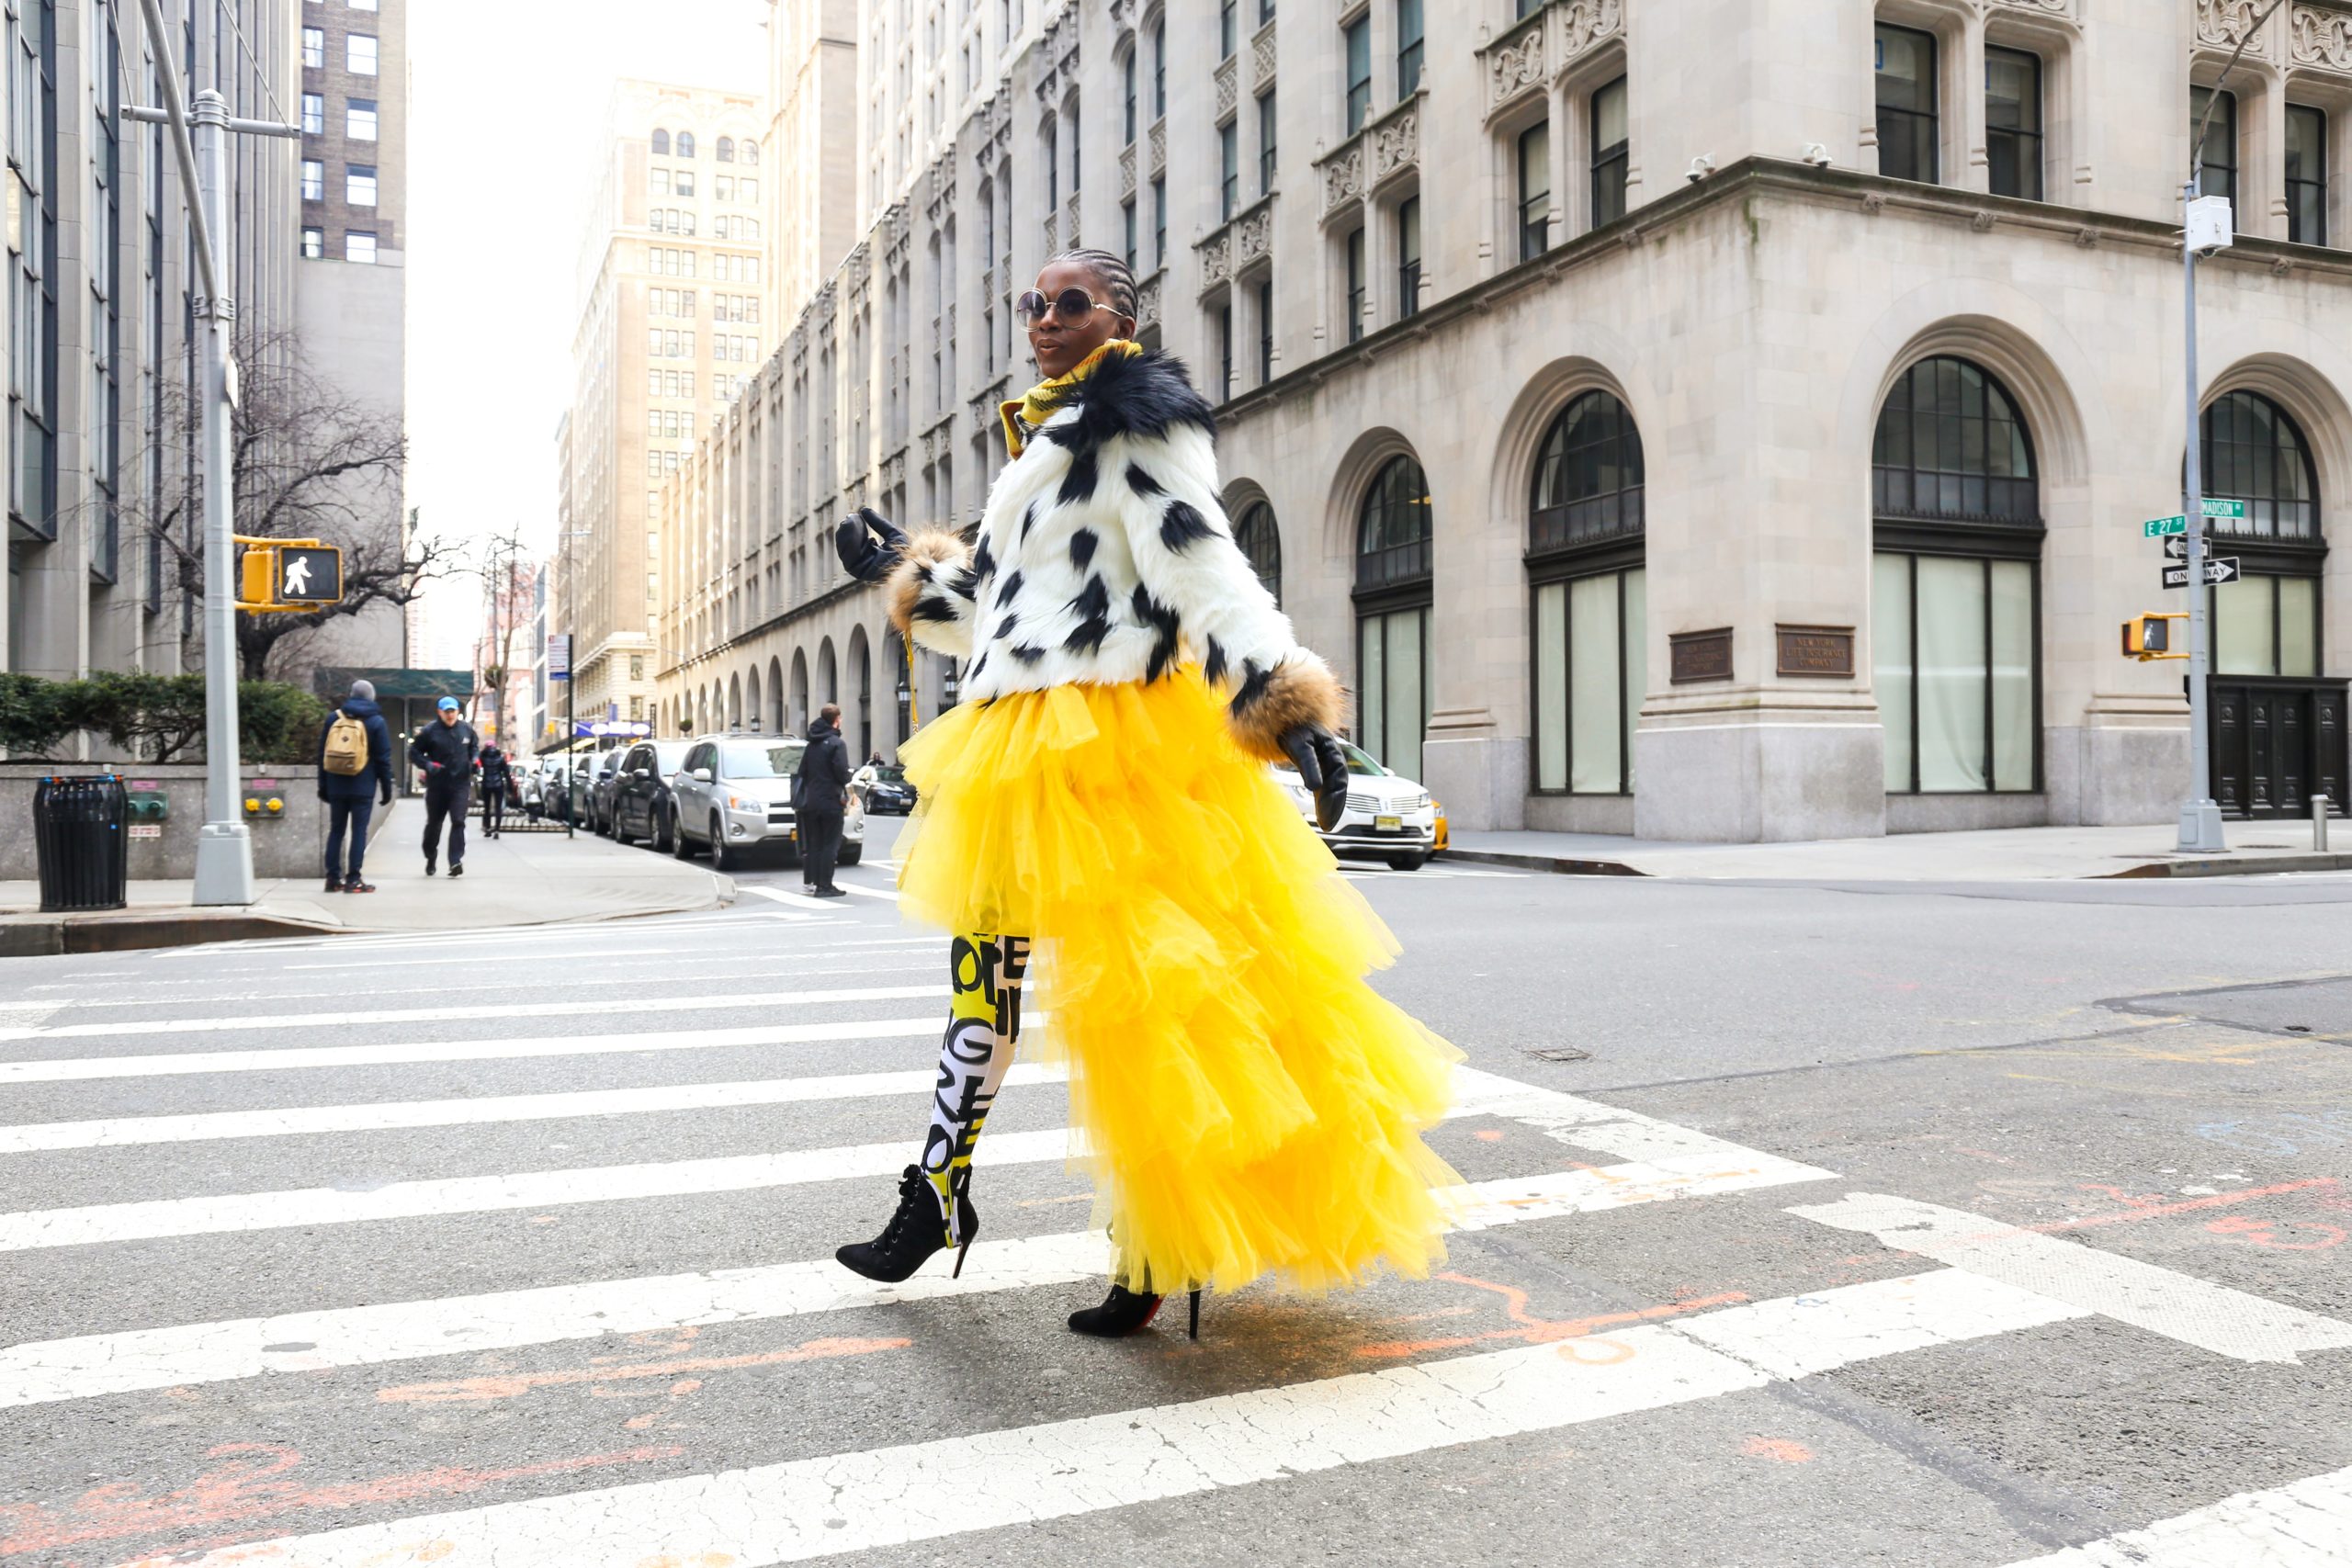 A woman waling along the street in an eccentric, high fashion outfit.